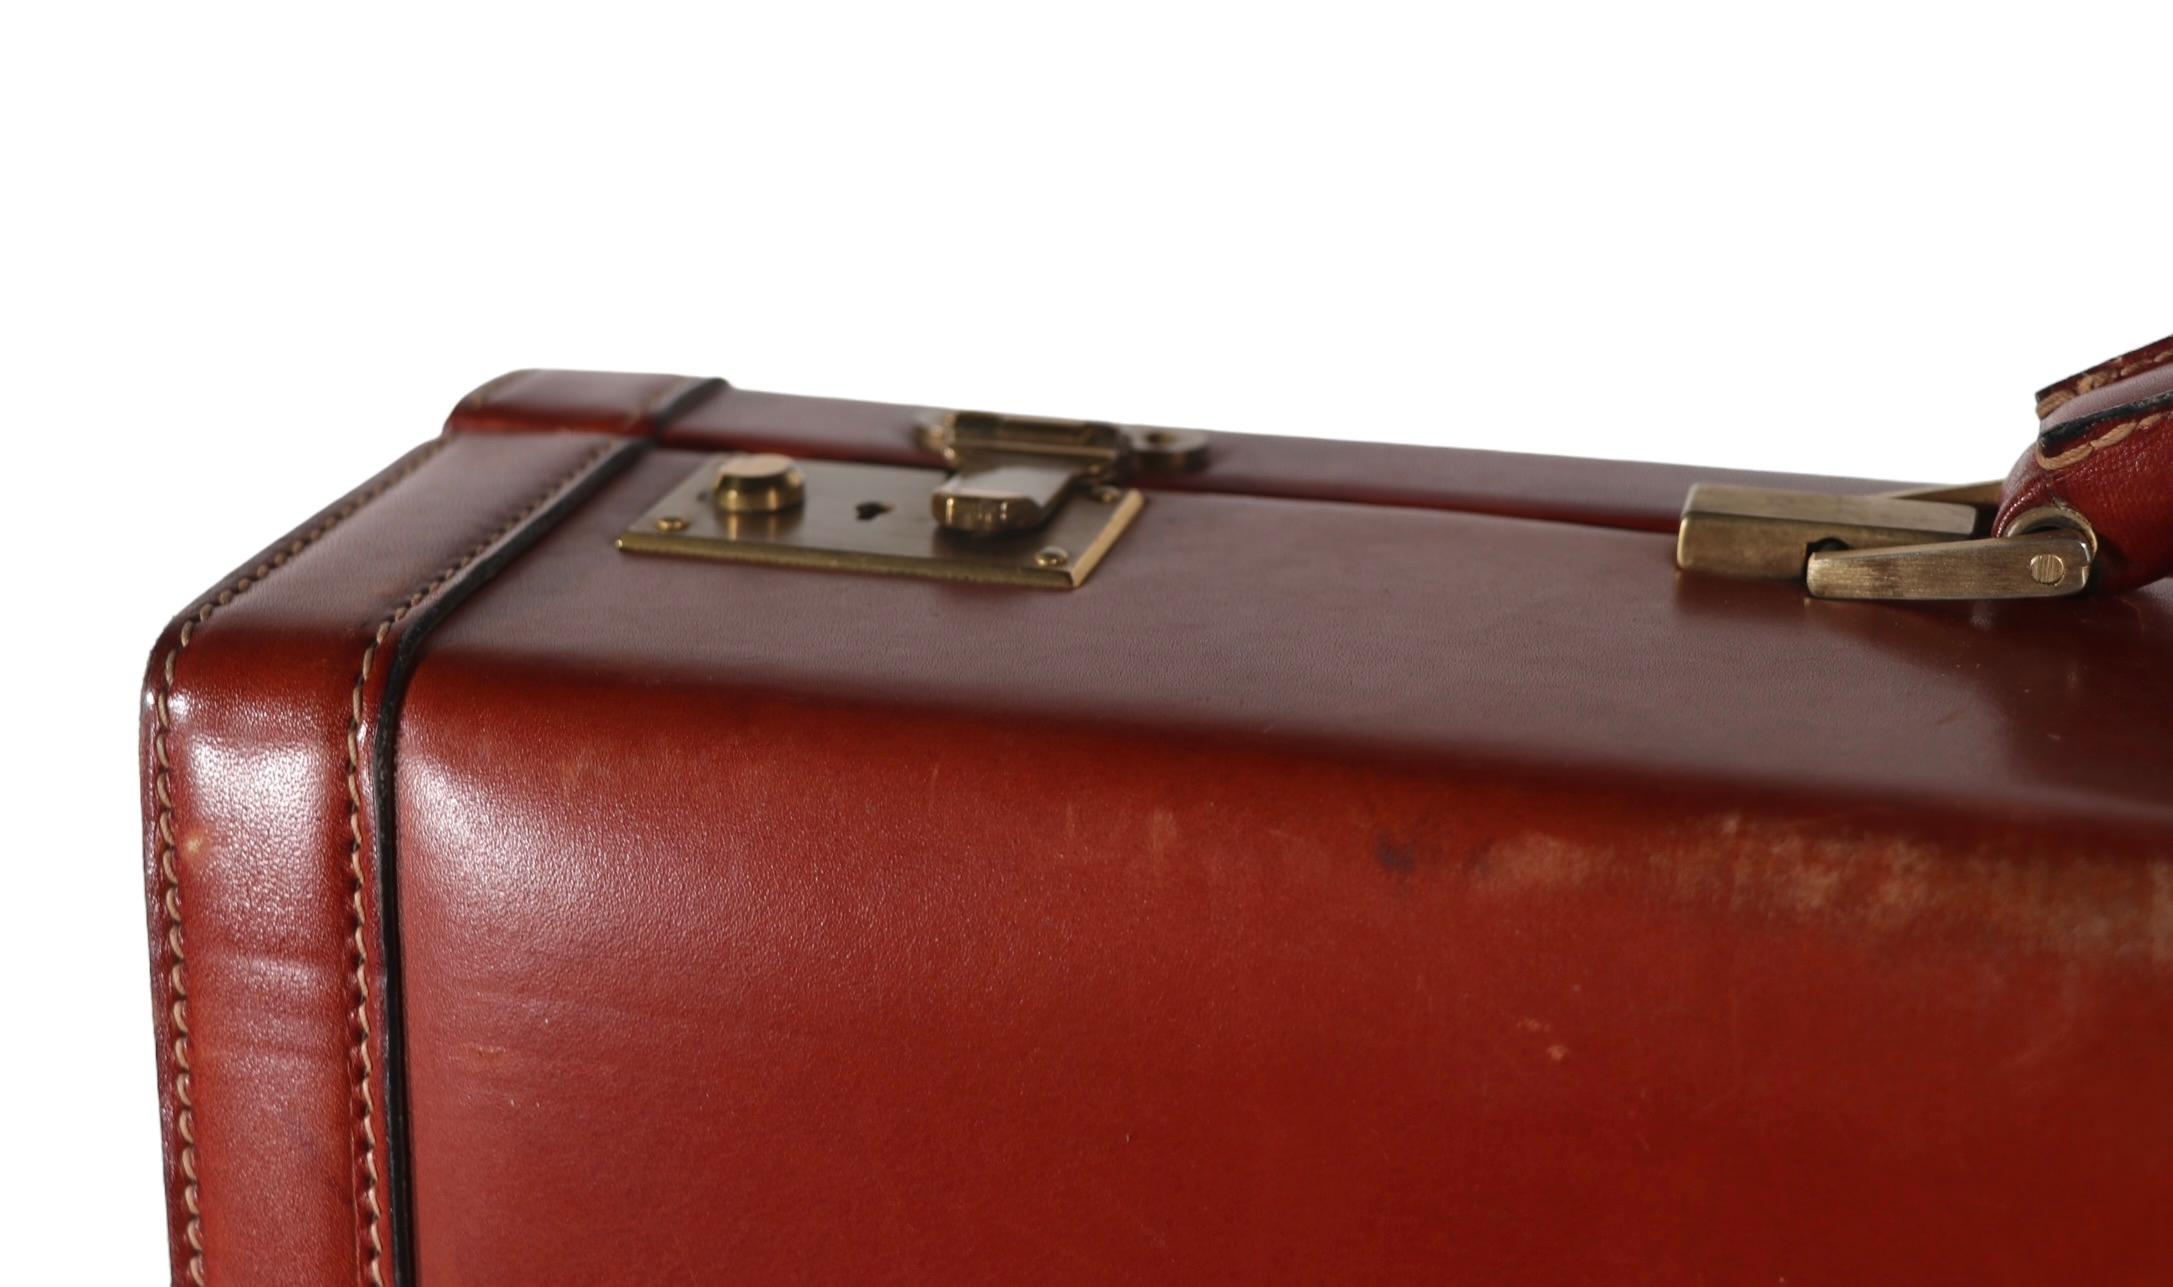  Mid Century Art Deco Hard Case Leather Attache Briefcase  after Bally, Hermes  For Sale 7